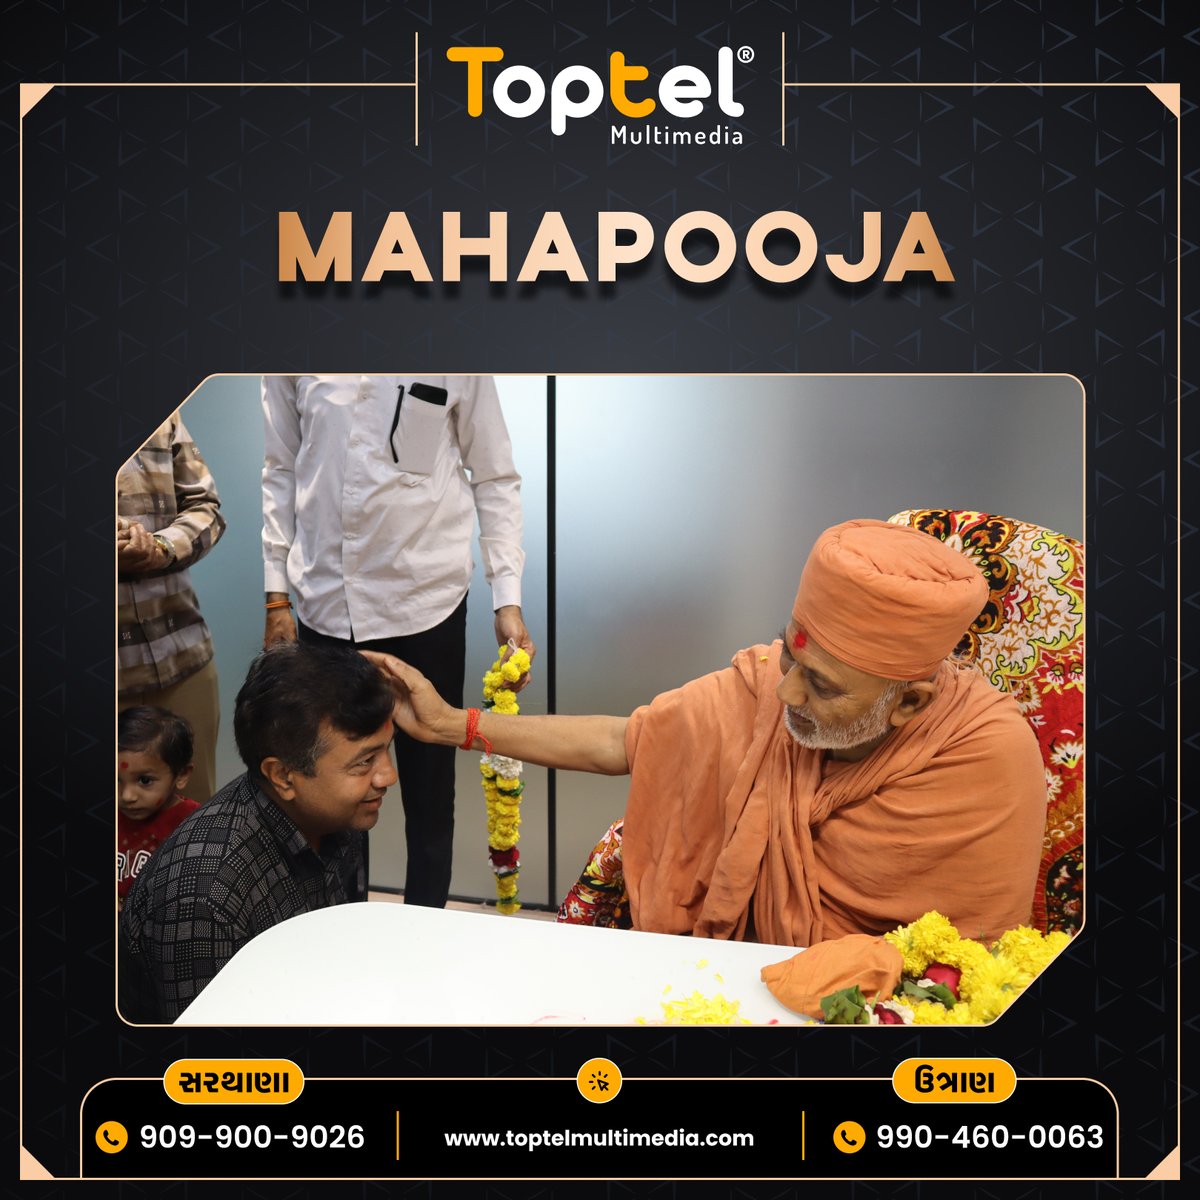 Moments of Celebration at our New Branch Opening Maha Puja!🌟🙏
.
.
#Toptelmultimedia #Tme #Toptel #Multimedia #ToptelSarthana #BranchOpening#MahaPuja #NewBeginnings #GrandOpening #RibbonCutting #CelebrationTime #Blessings #TraditionalVibes #Ceremony #SpecialMoments